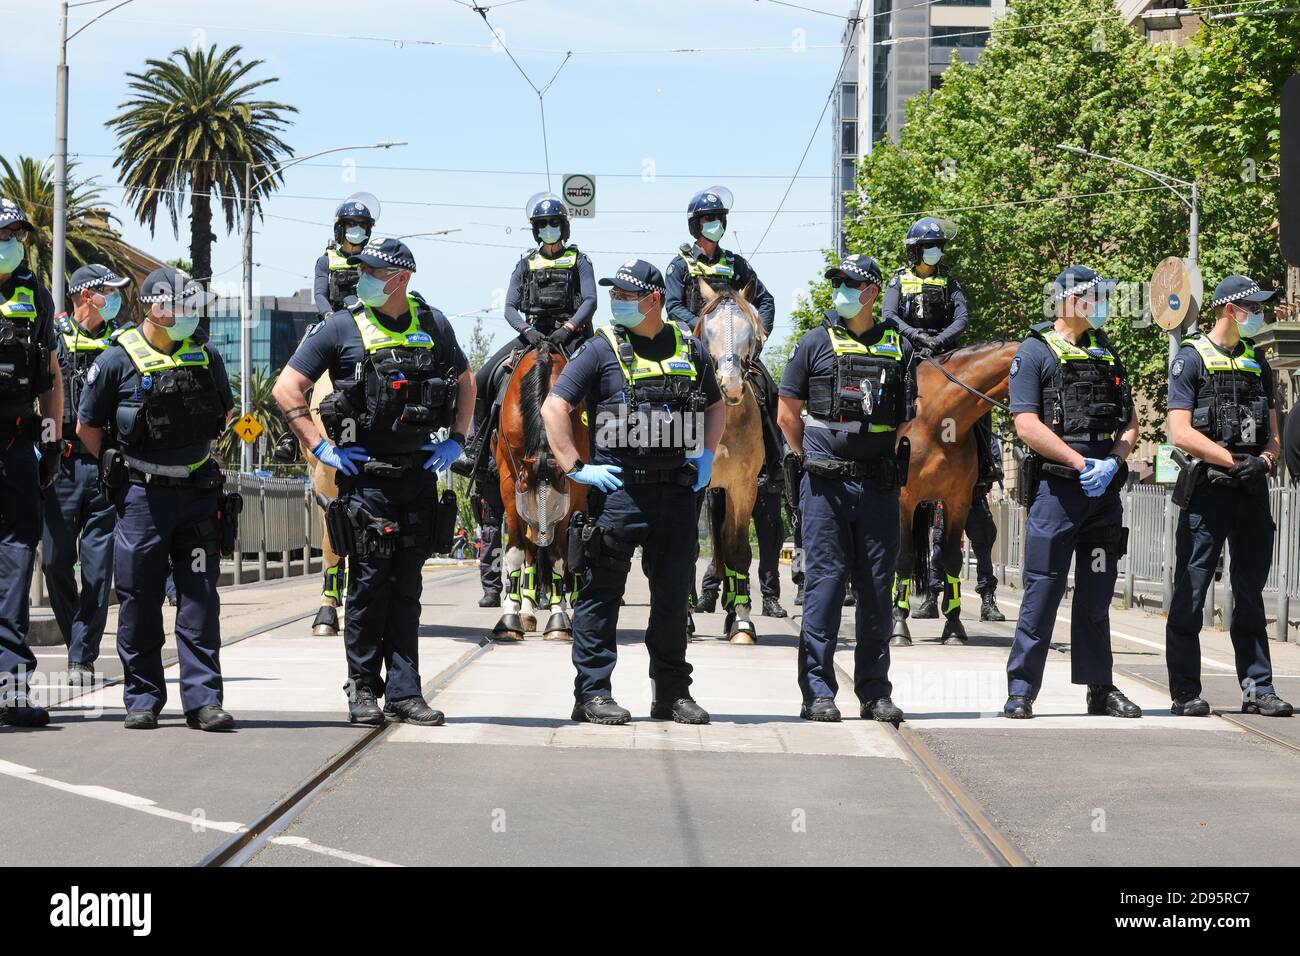 Melbourne, Australia 03 Nov 2020, police block Spring Street to contain a protest in front the state parliament during another Freedom Day demonstration on Melbourne Cup Day demanding the sacking of Premier Daniel Andrews over lockdown laws. Credit: Michael Currie/Alamy Live News Stock Photo